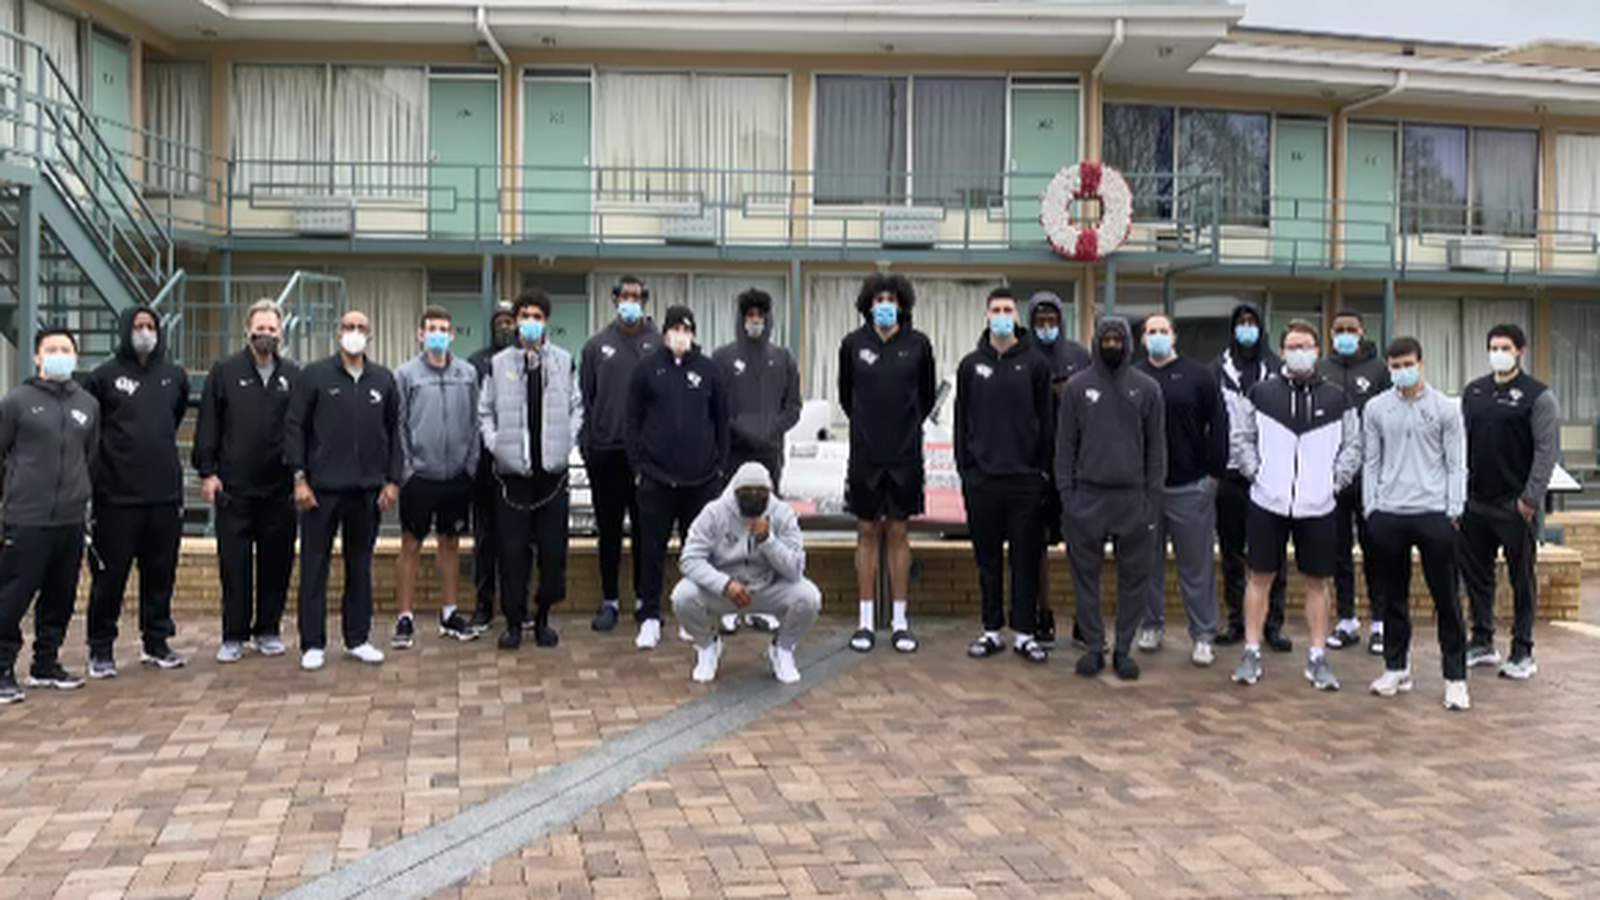 UCF basketball team visits Lorraine Motel before game against Memphis